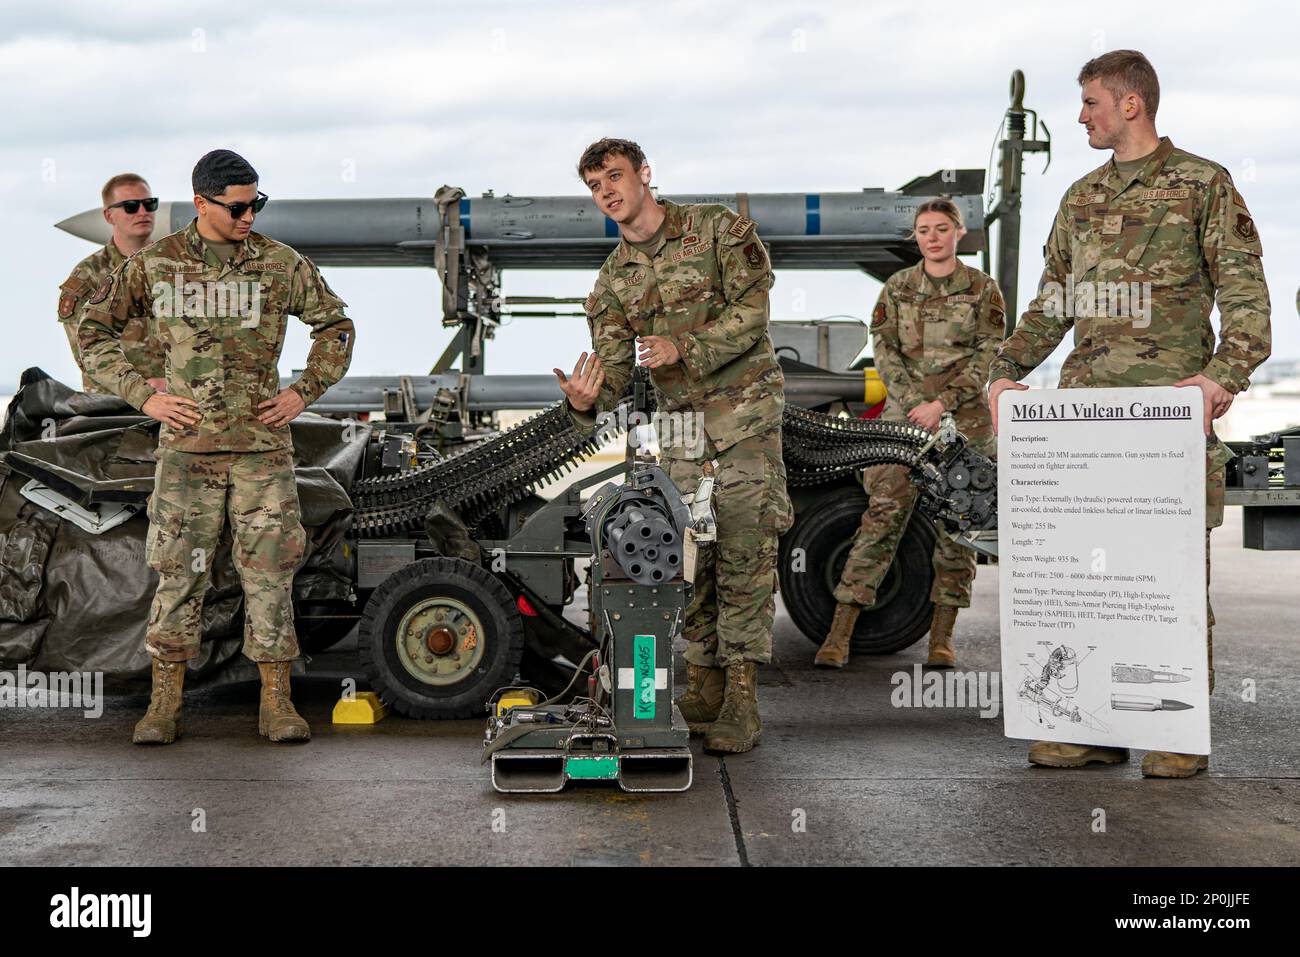 Senior Airman Connor Stears, center, 18th Munitions Squadron armament technician, explains the capabilities of a M61A1 Vulcan Cannon machine gun, which are typically attached to fighter aircraft, before the start of Shogun Showdown, a weapons load competition at Kadena Air Base, Japan, Feb. 3, 2023. The 18th MUNS provided information to the audience for the several gun and missile systems that are a part of generating combat-ready aircraft. Stock Photo